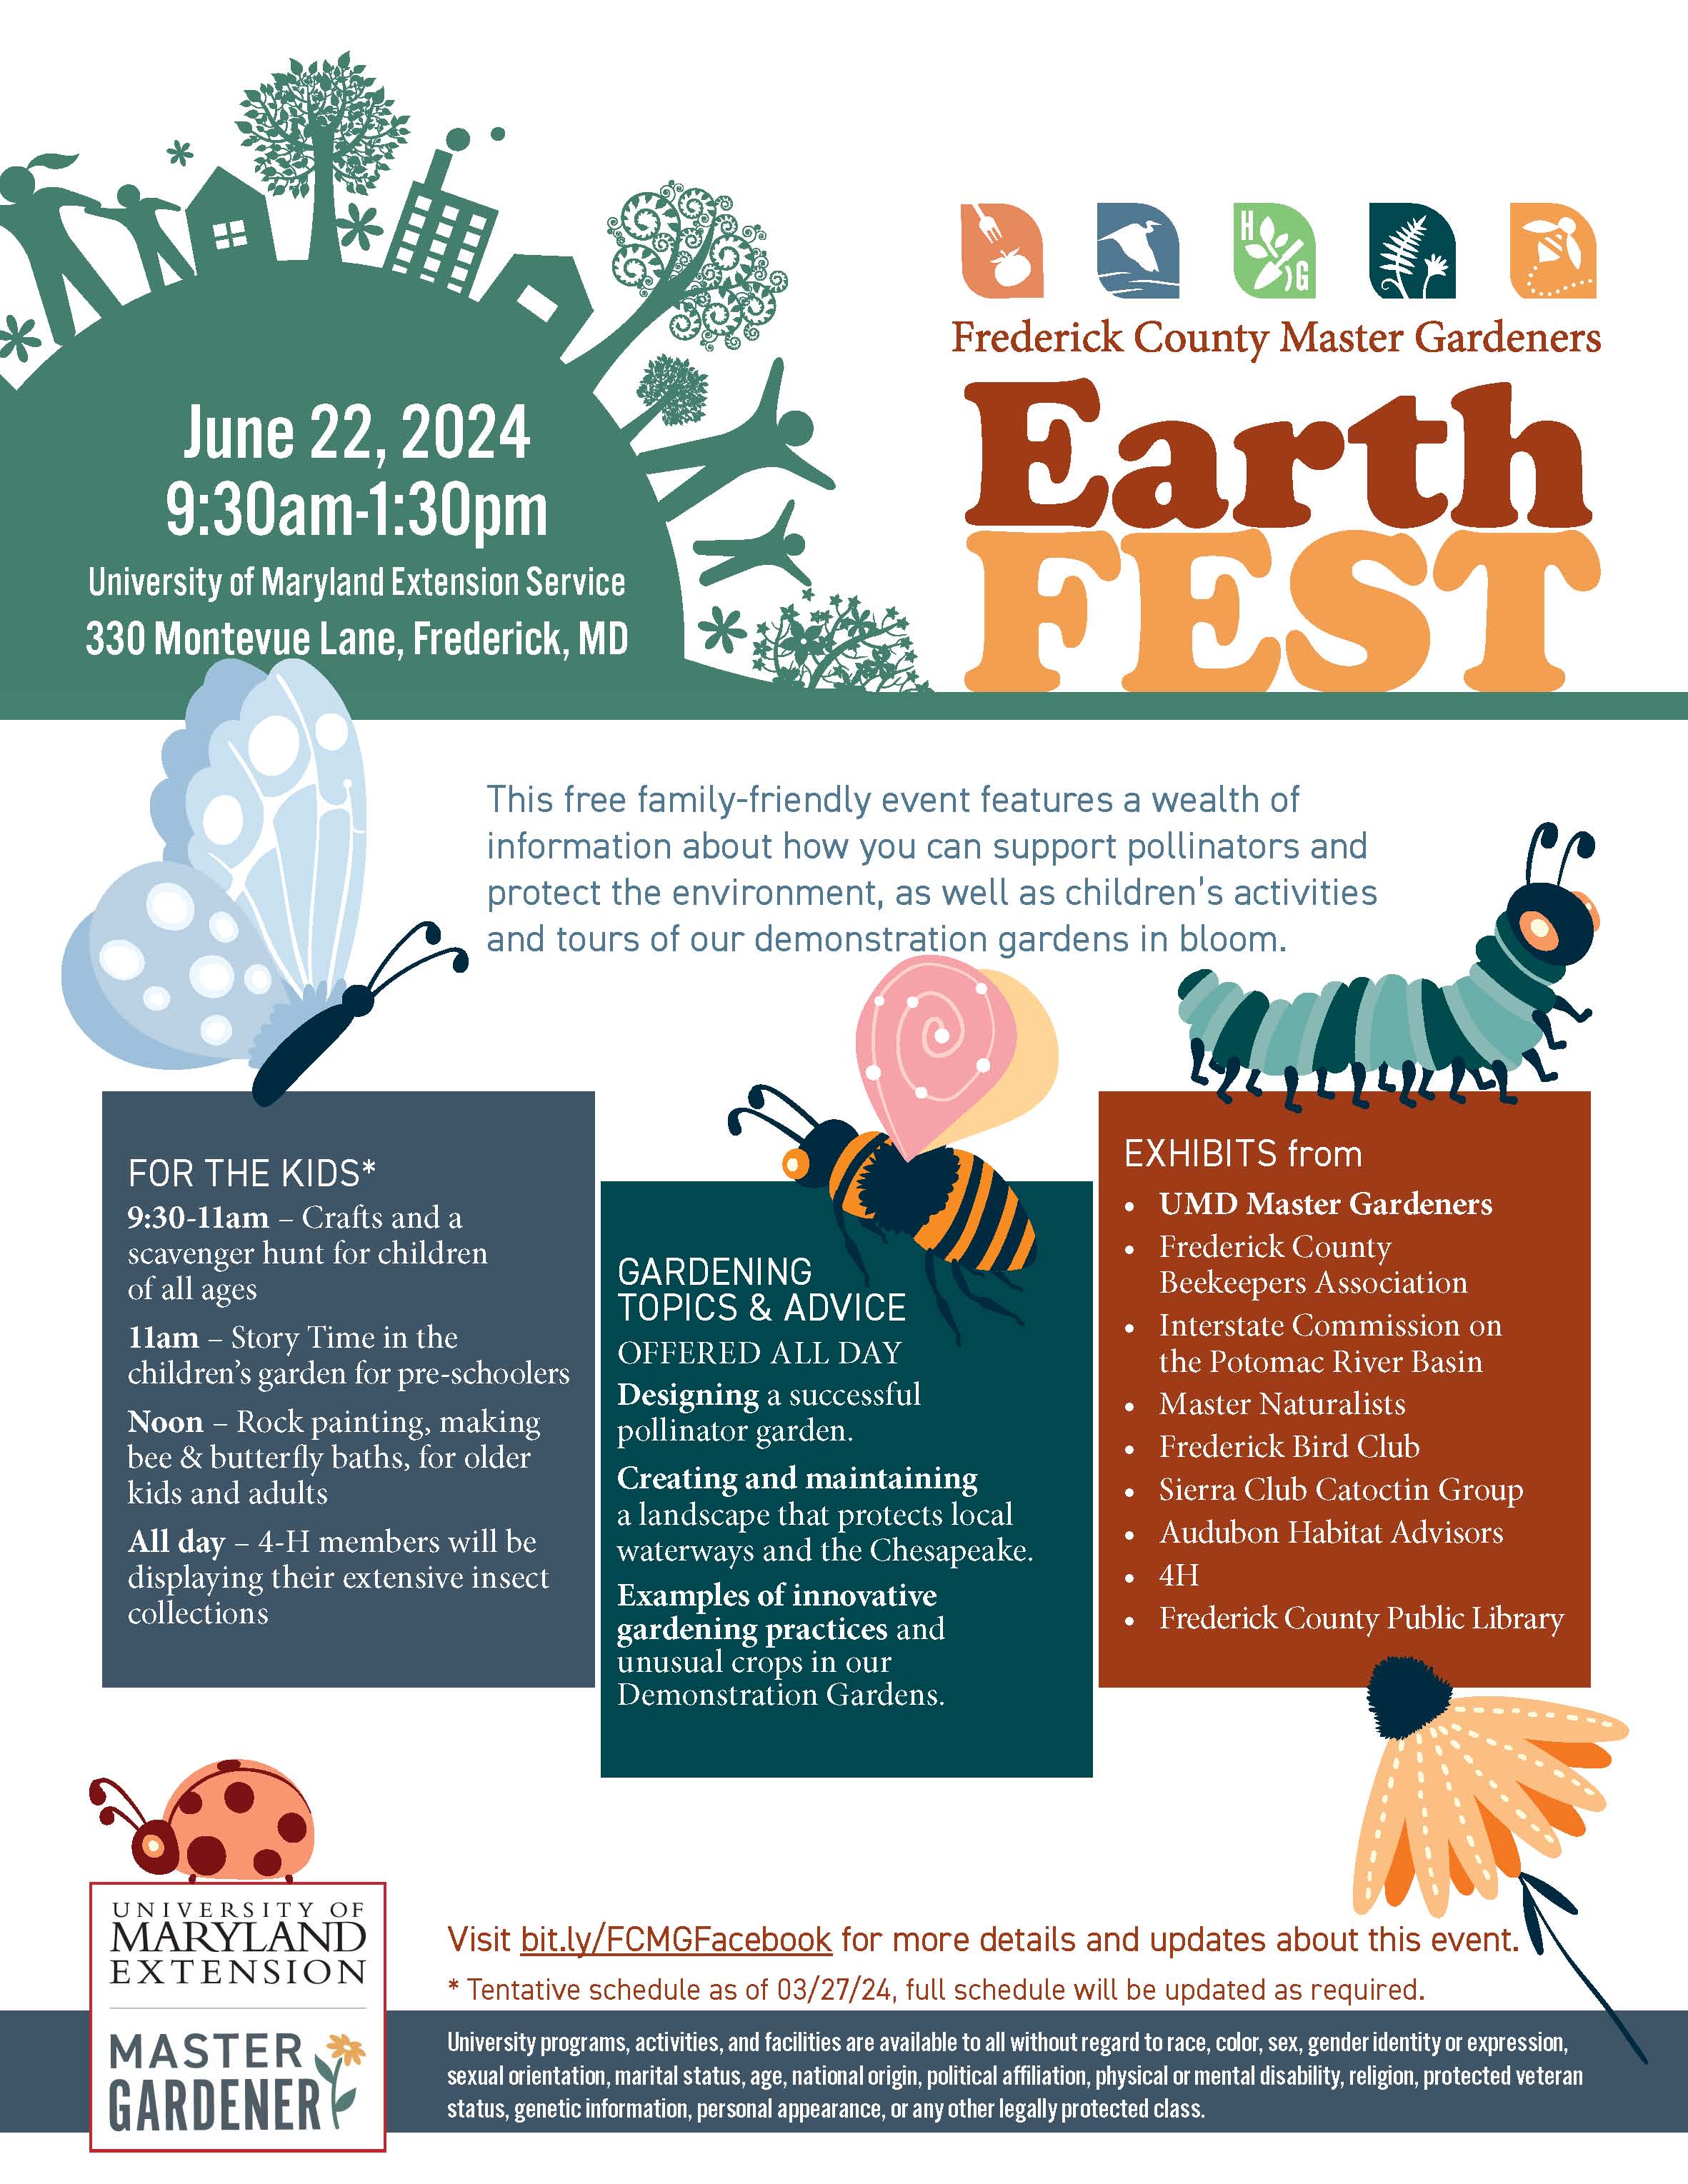 FCMG Earth Fest June 22, 2024 9:30am-1:30pm University of Maryland Extension Service 330 Montevue Lane, Frederick, MD